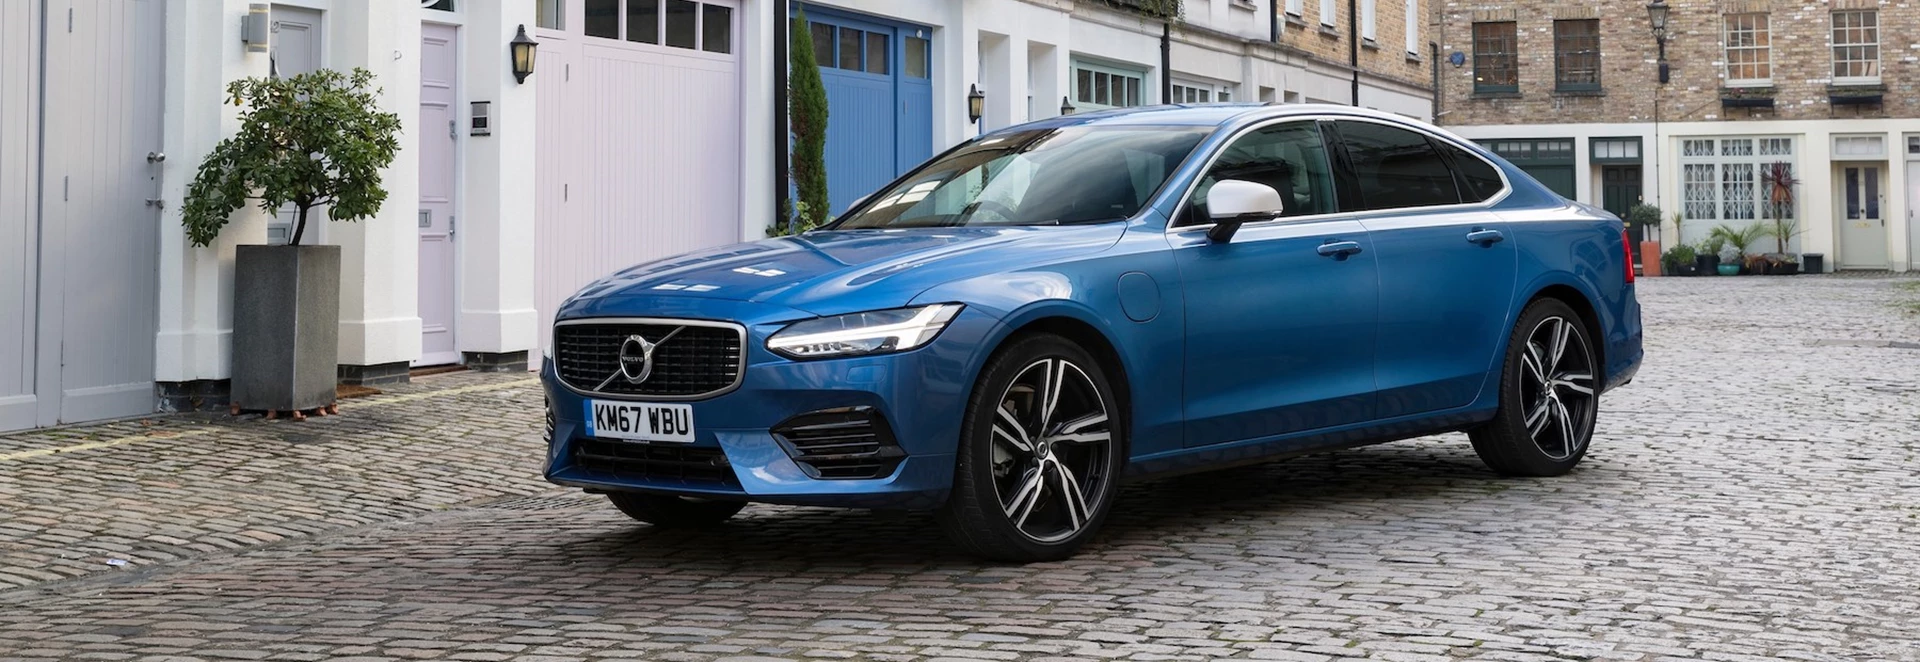 Revised Volvo range includes new PHEVs and hybrid-only S90 